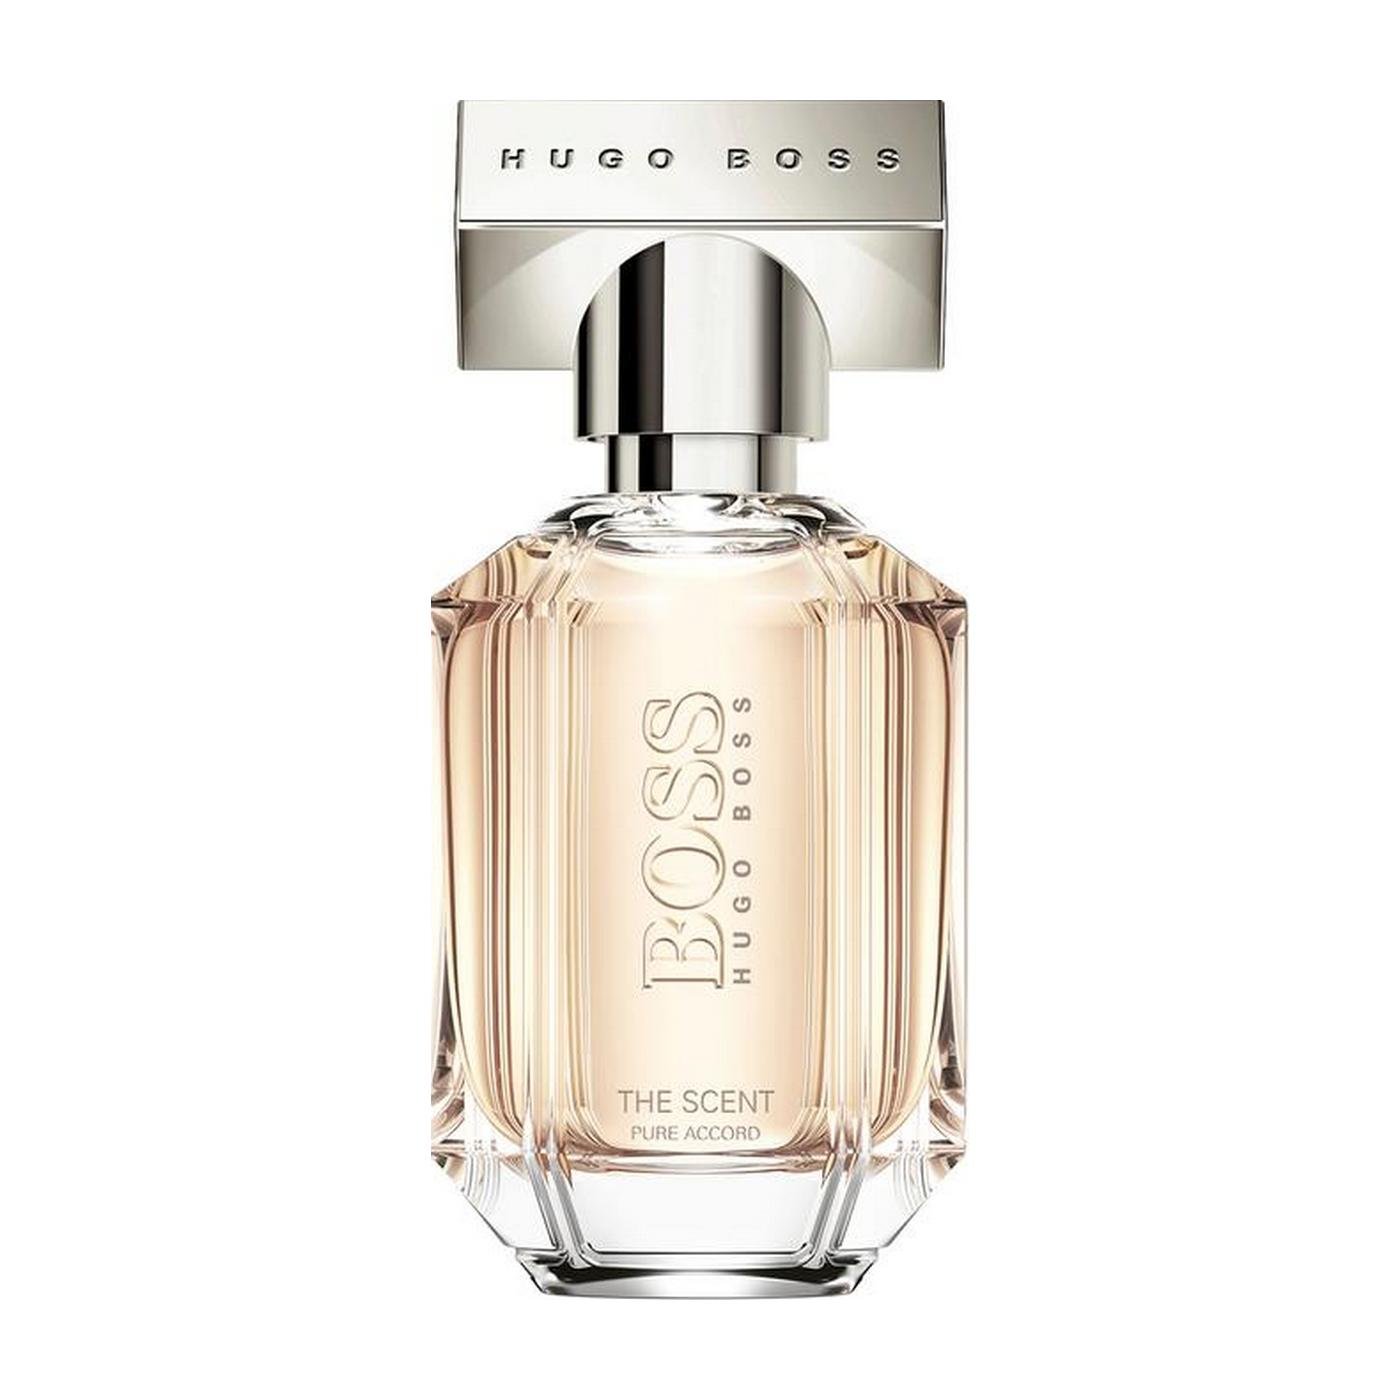 Туалетная вода Hugo Boss The Scent Pure Accord for her 30 мл boss the scent private accord for her